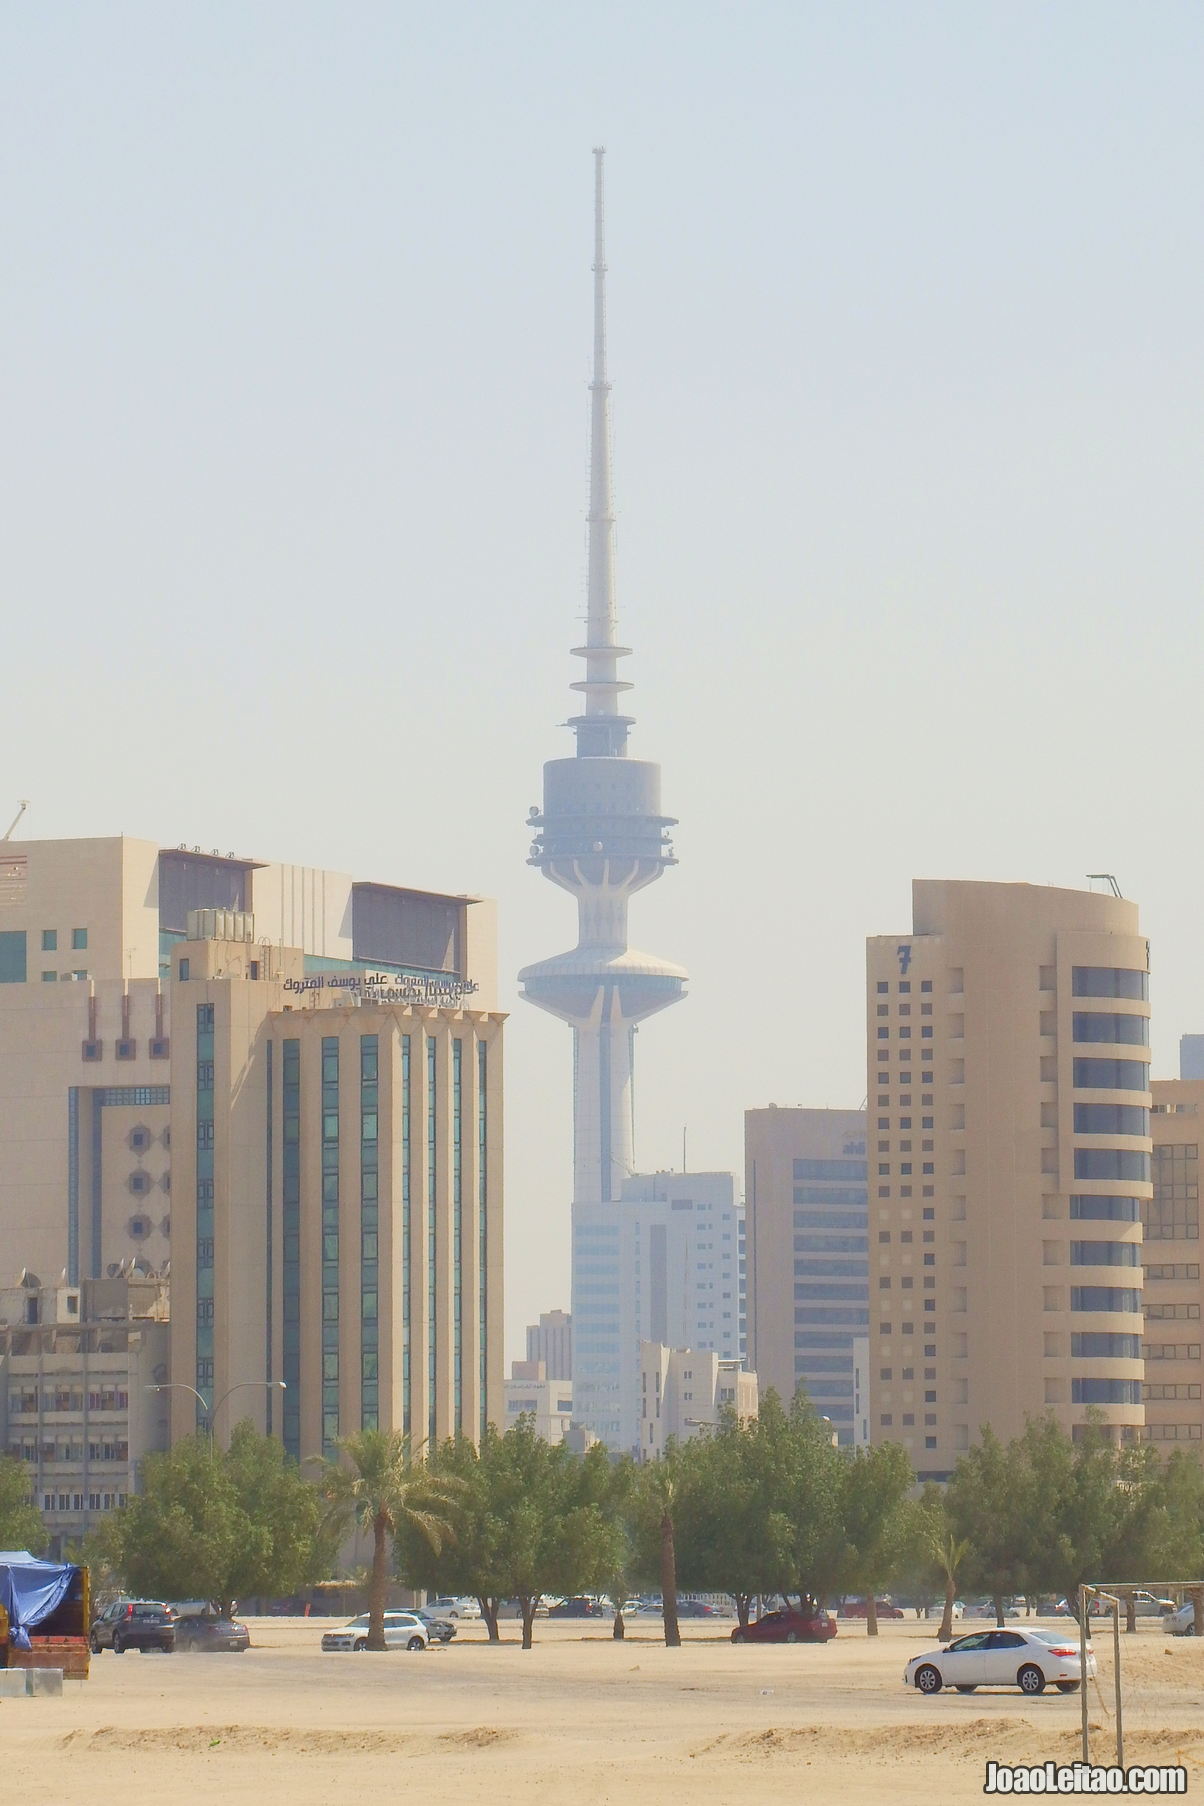 Liberation Tower in Kuwait